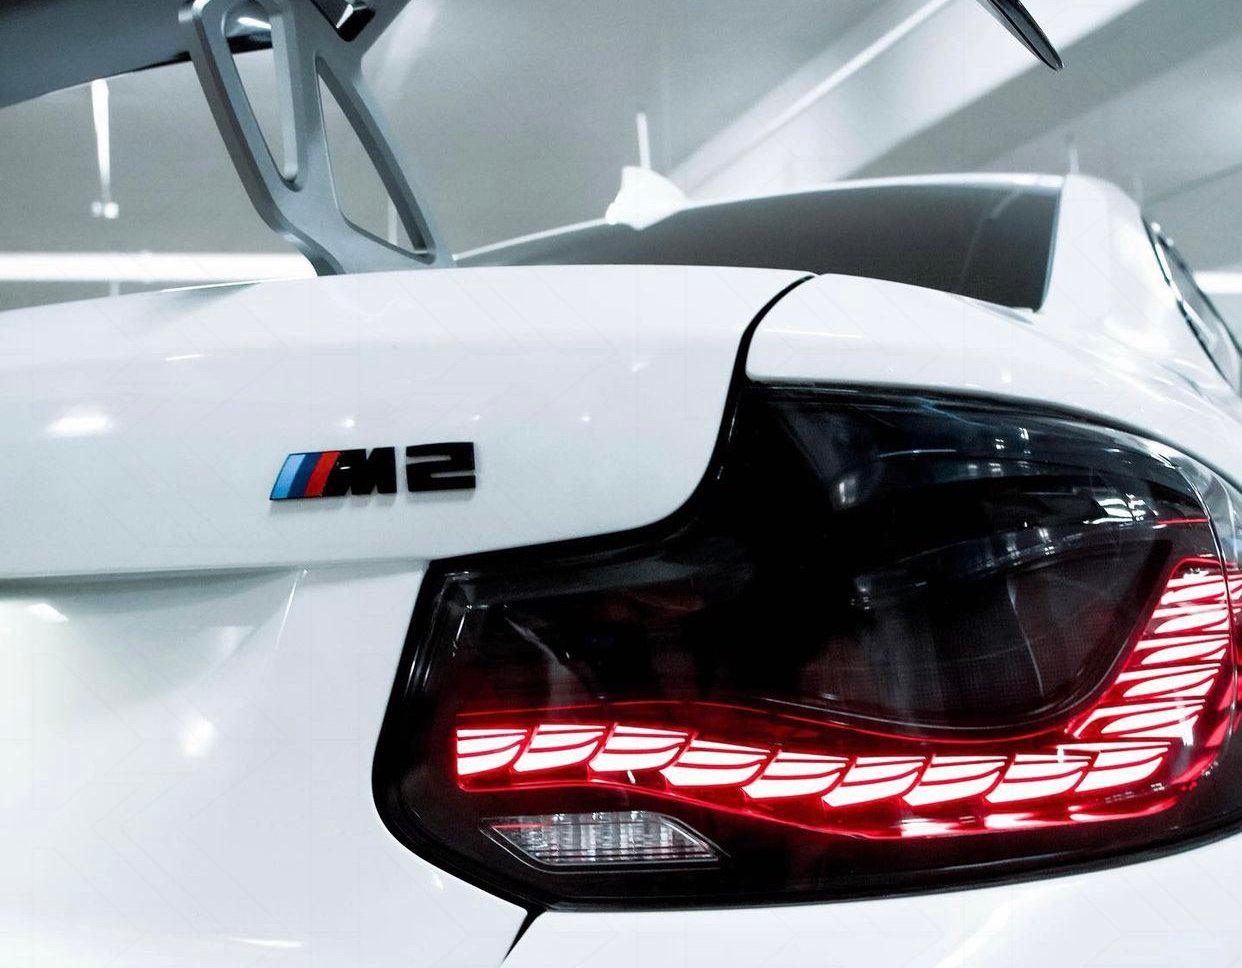 BMW 2-Series & M2 (F22 F23 F87) Dragon Scale OLED Tail Lights - Red and Black Options - K2 Industries